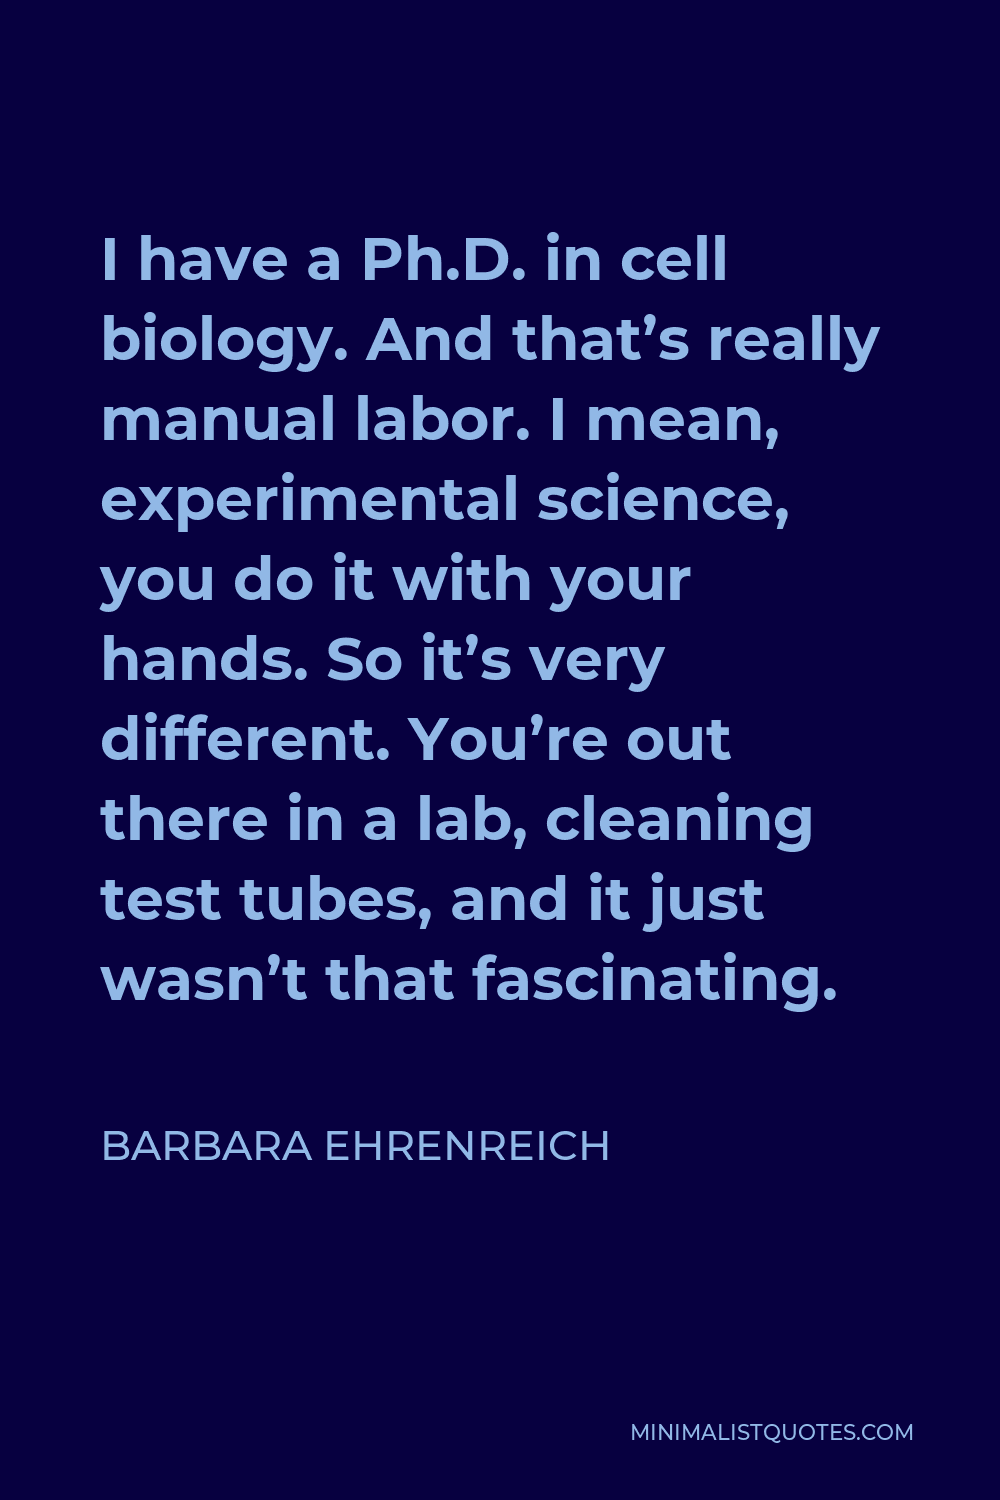 Barbara Ehrenreich Quote - I have a Ph.D. in cell biology. And that’s really manual labor. I mean, experimental science, you do it with your hands. So it’s very different. You’re out there in a lab, cleaning test tubes, and it just wasn’t that fascinating.